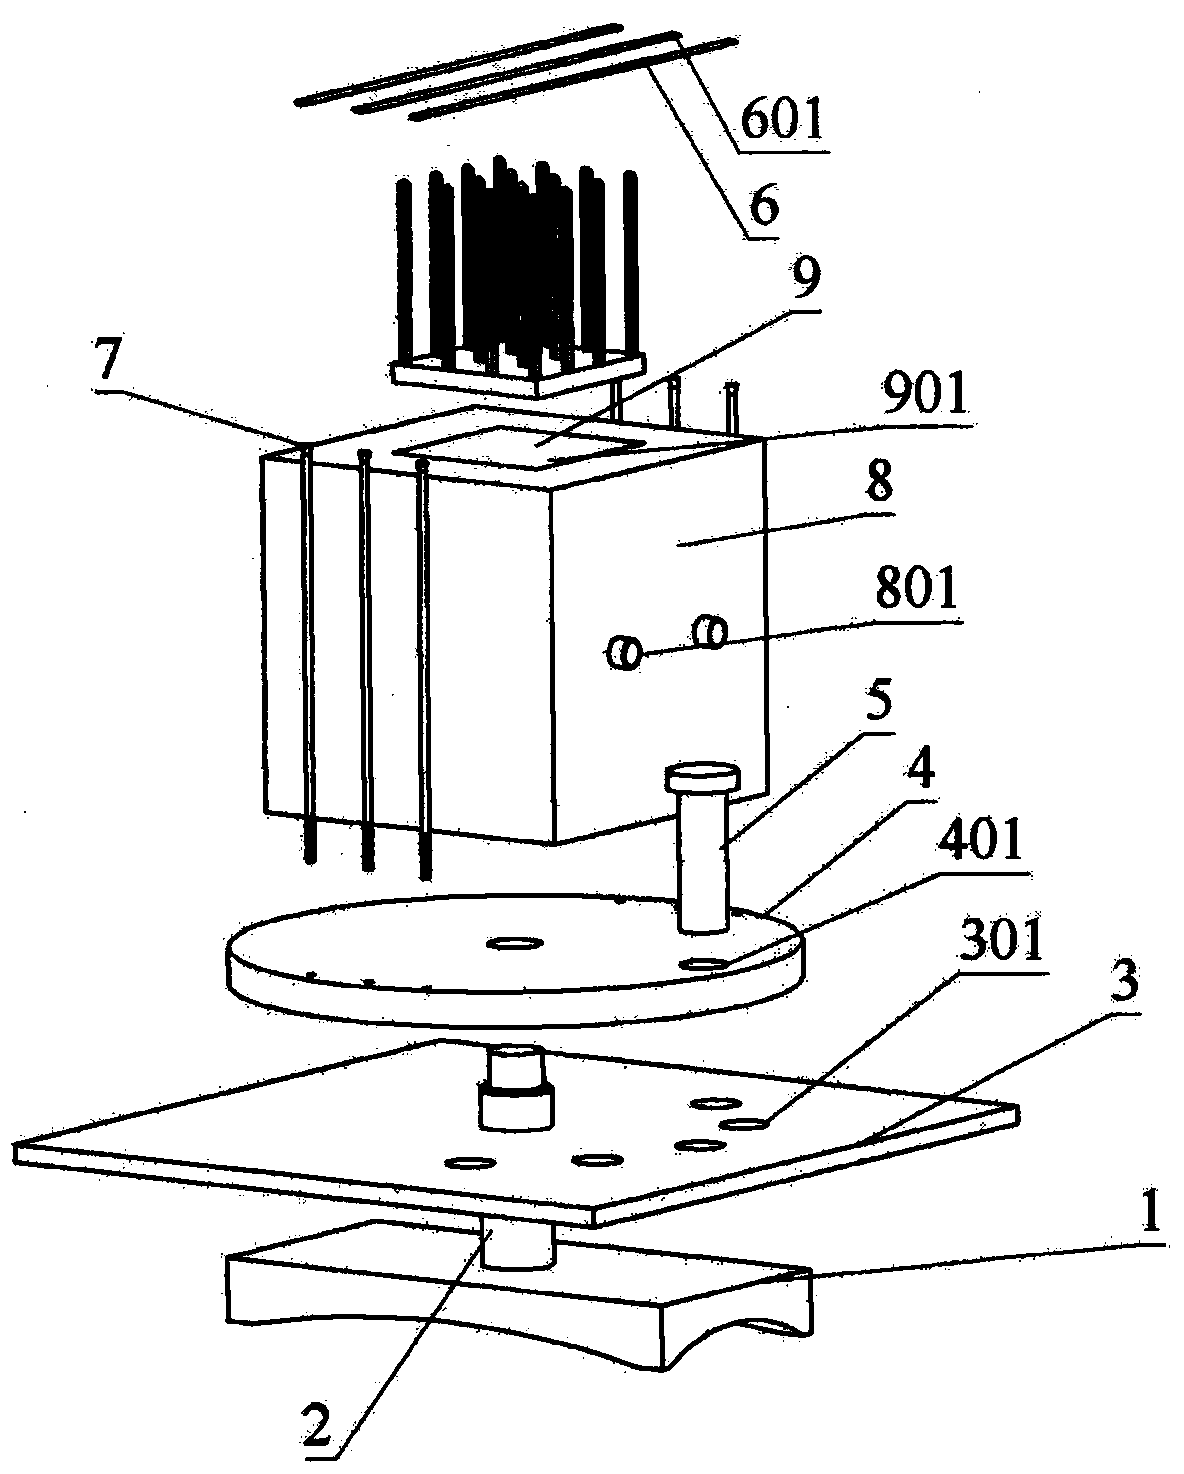 Apparatus and method for testing thermal resistance of textile structure radiator